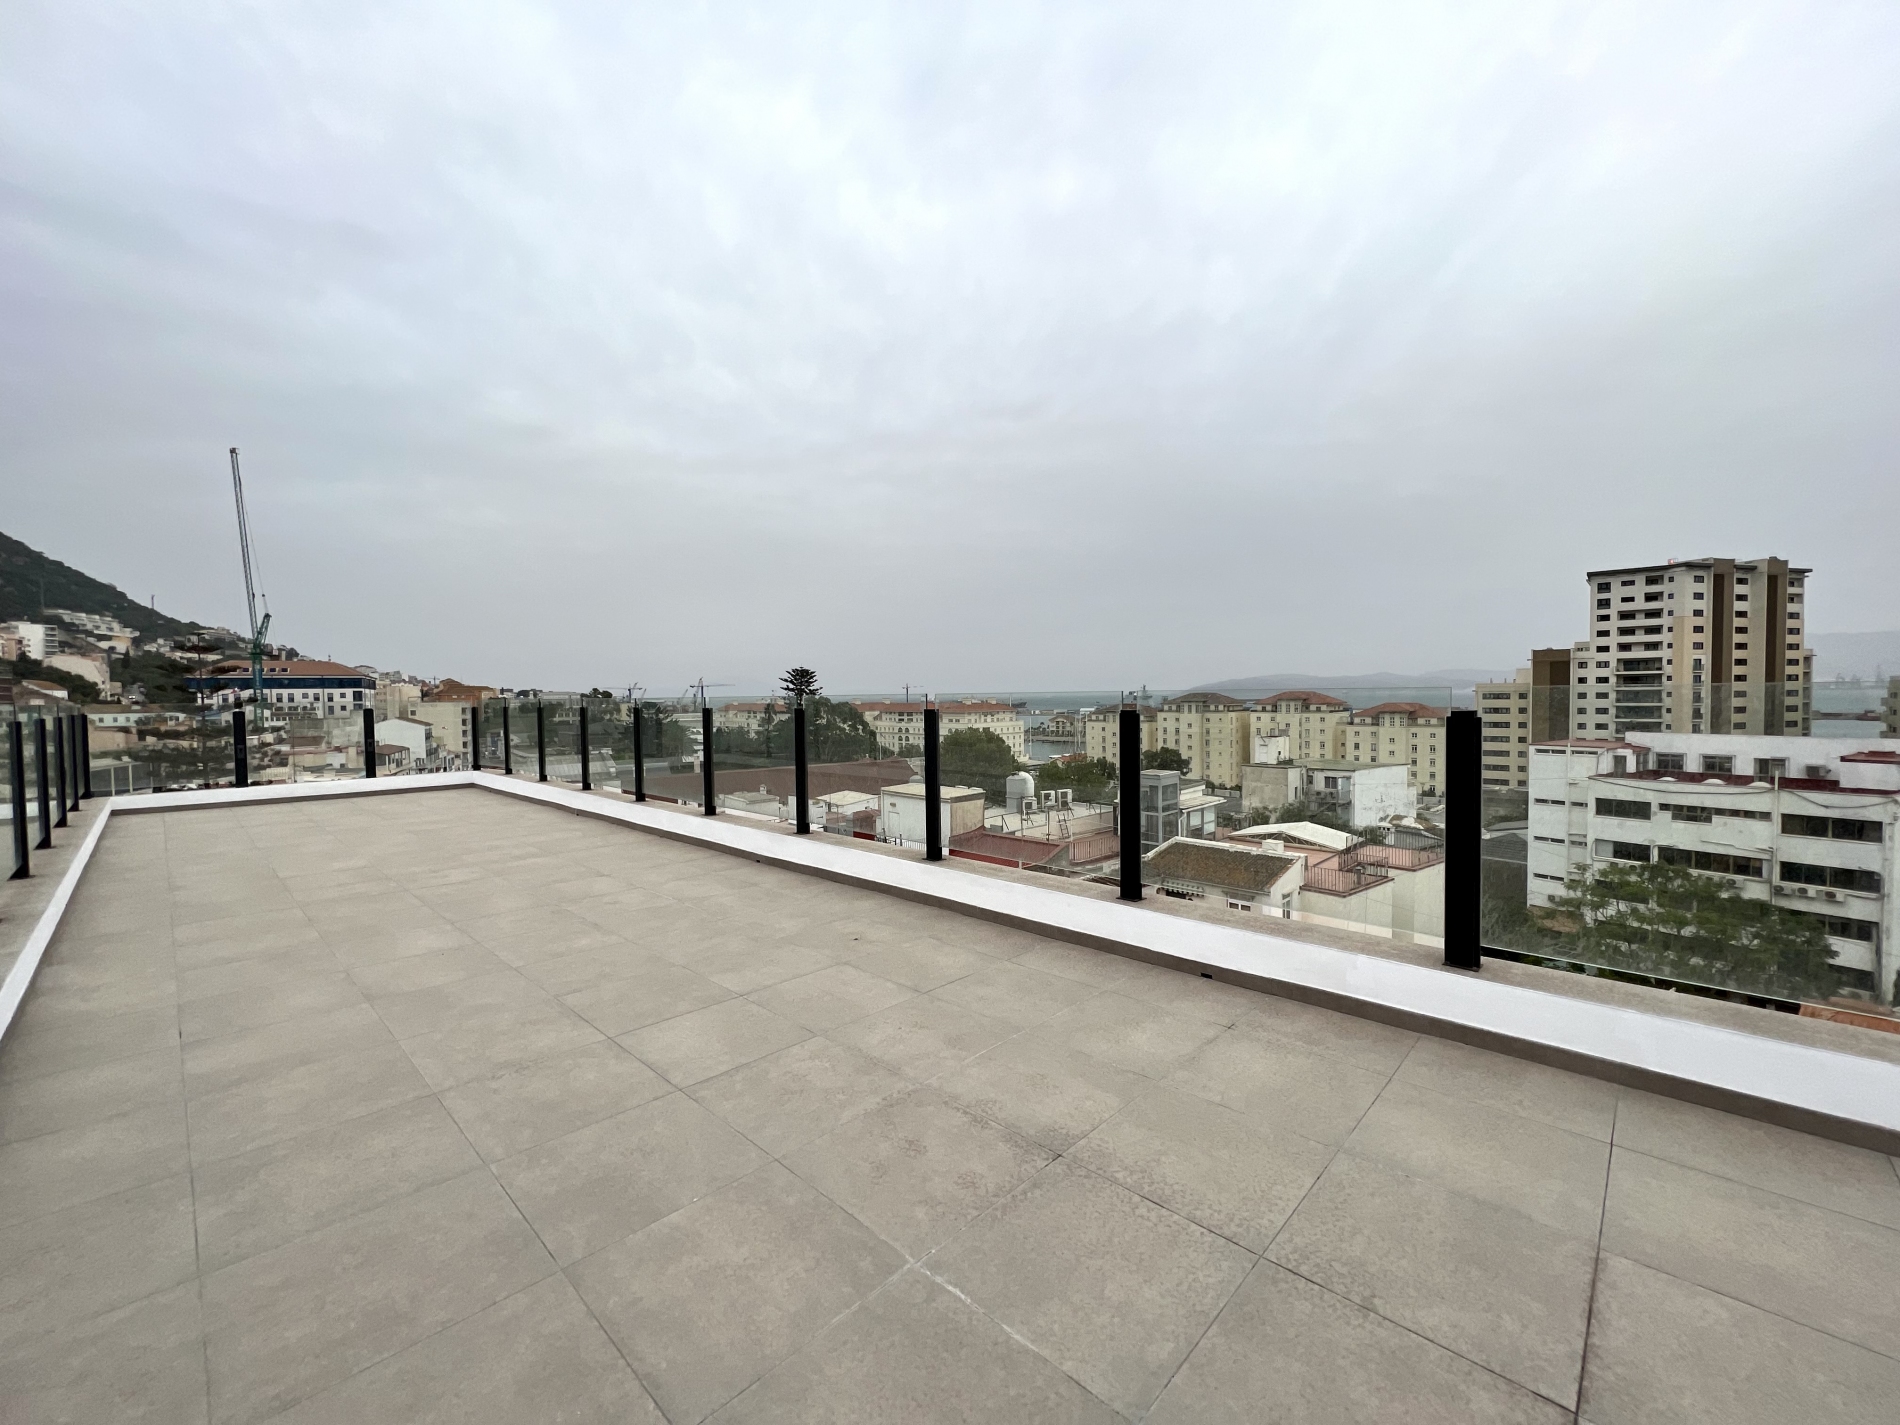 4 Bedroom Penthouse For Sale And Rental In Main Street Gibraltar